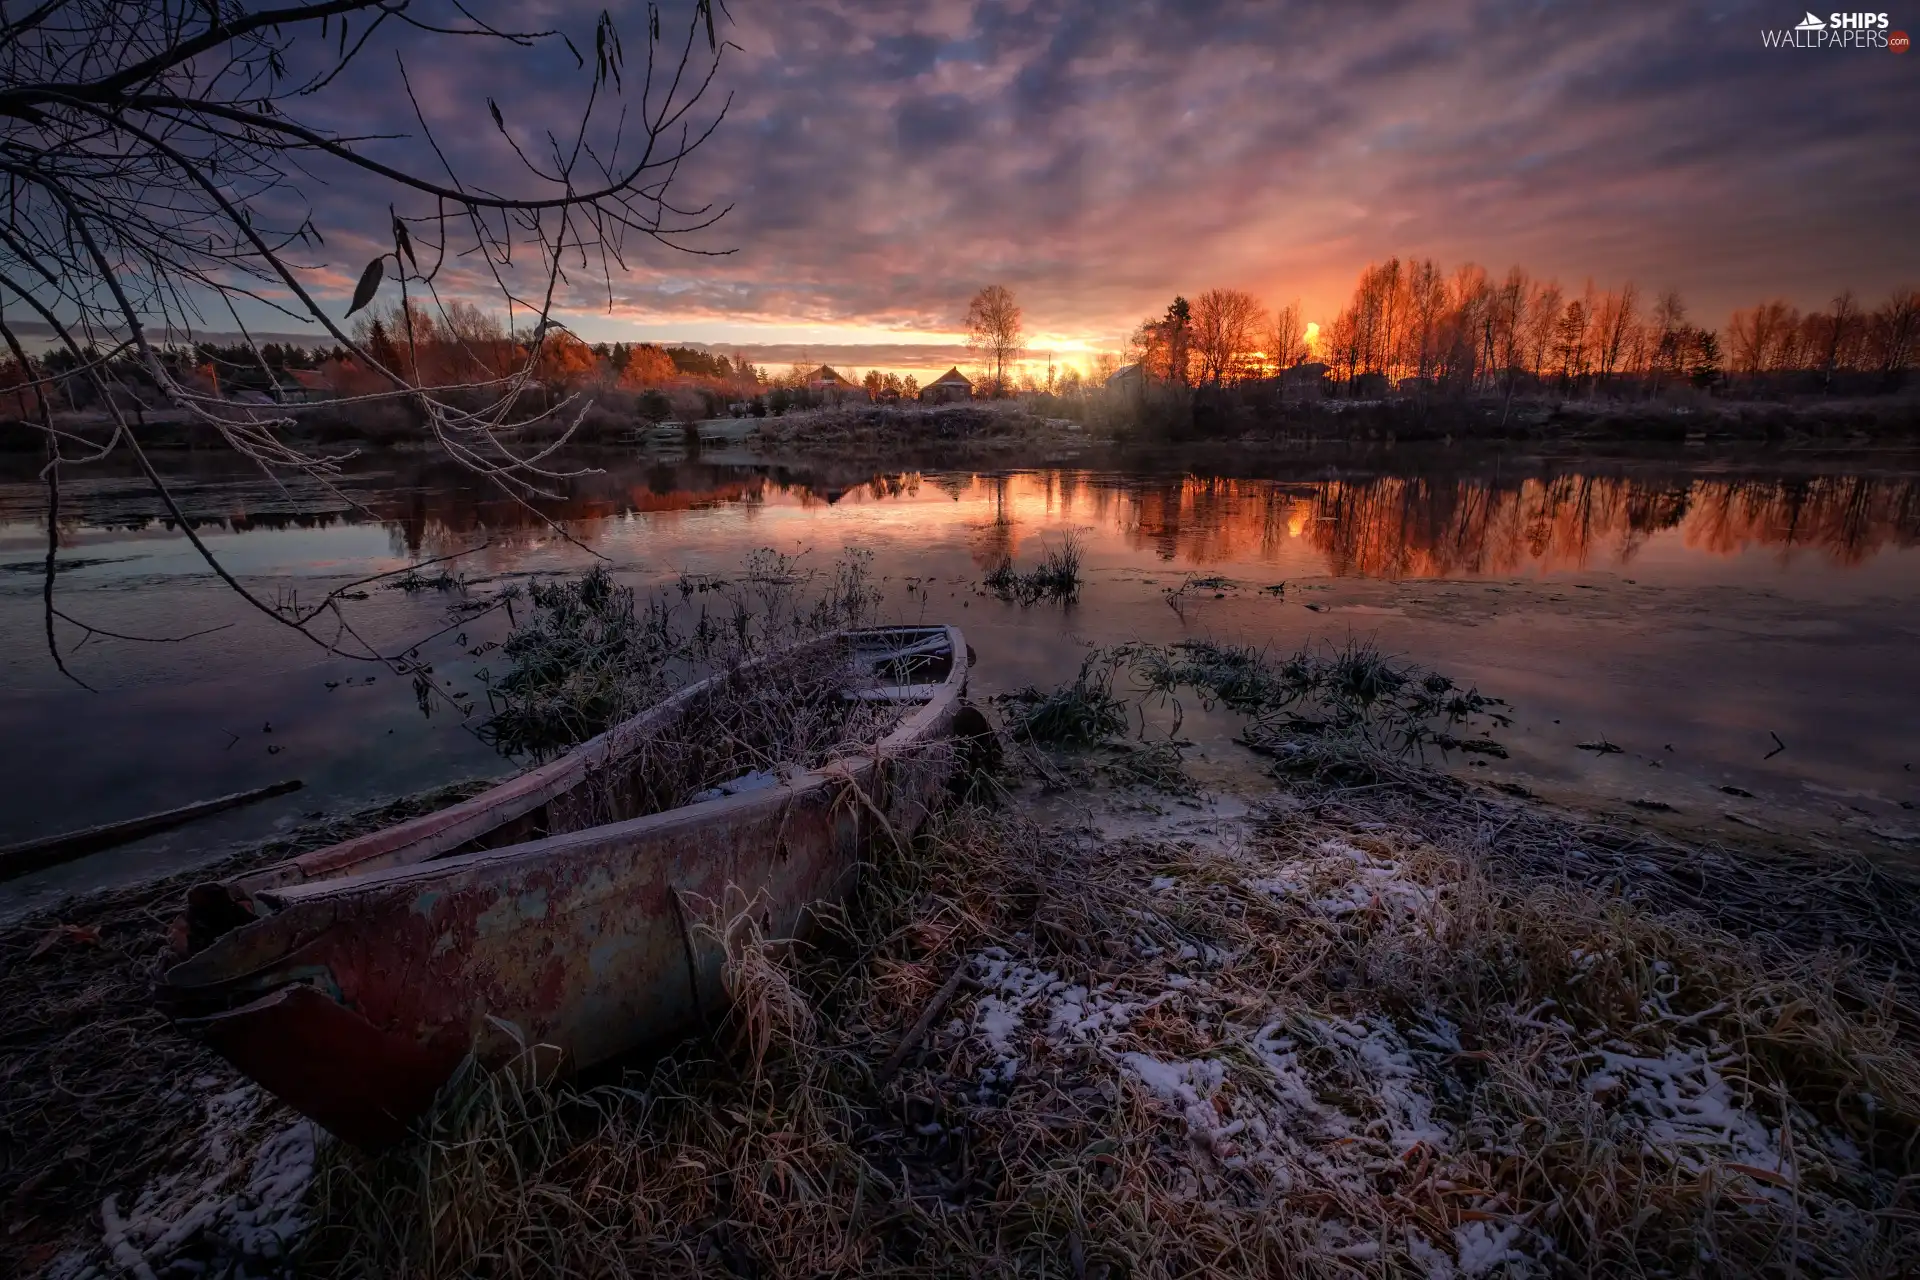 Boat, Dubna River, Great Sunsets, winter, Latgale, Latvia, trees, viewes, Houses